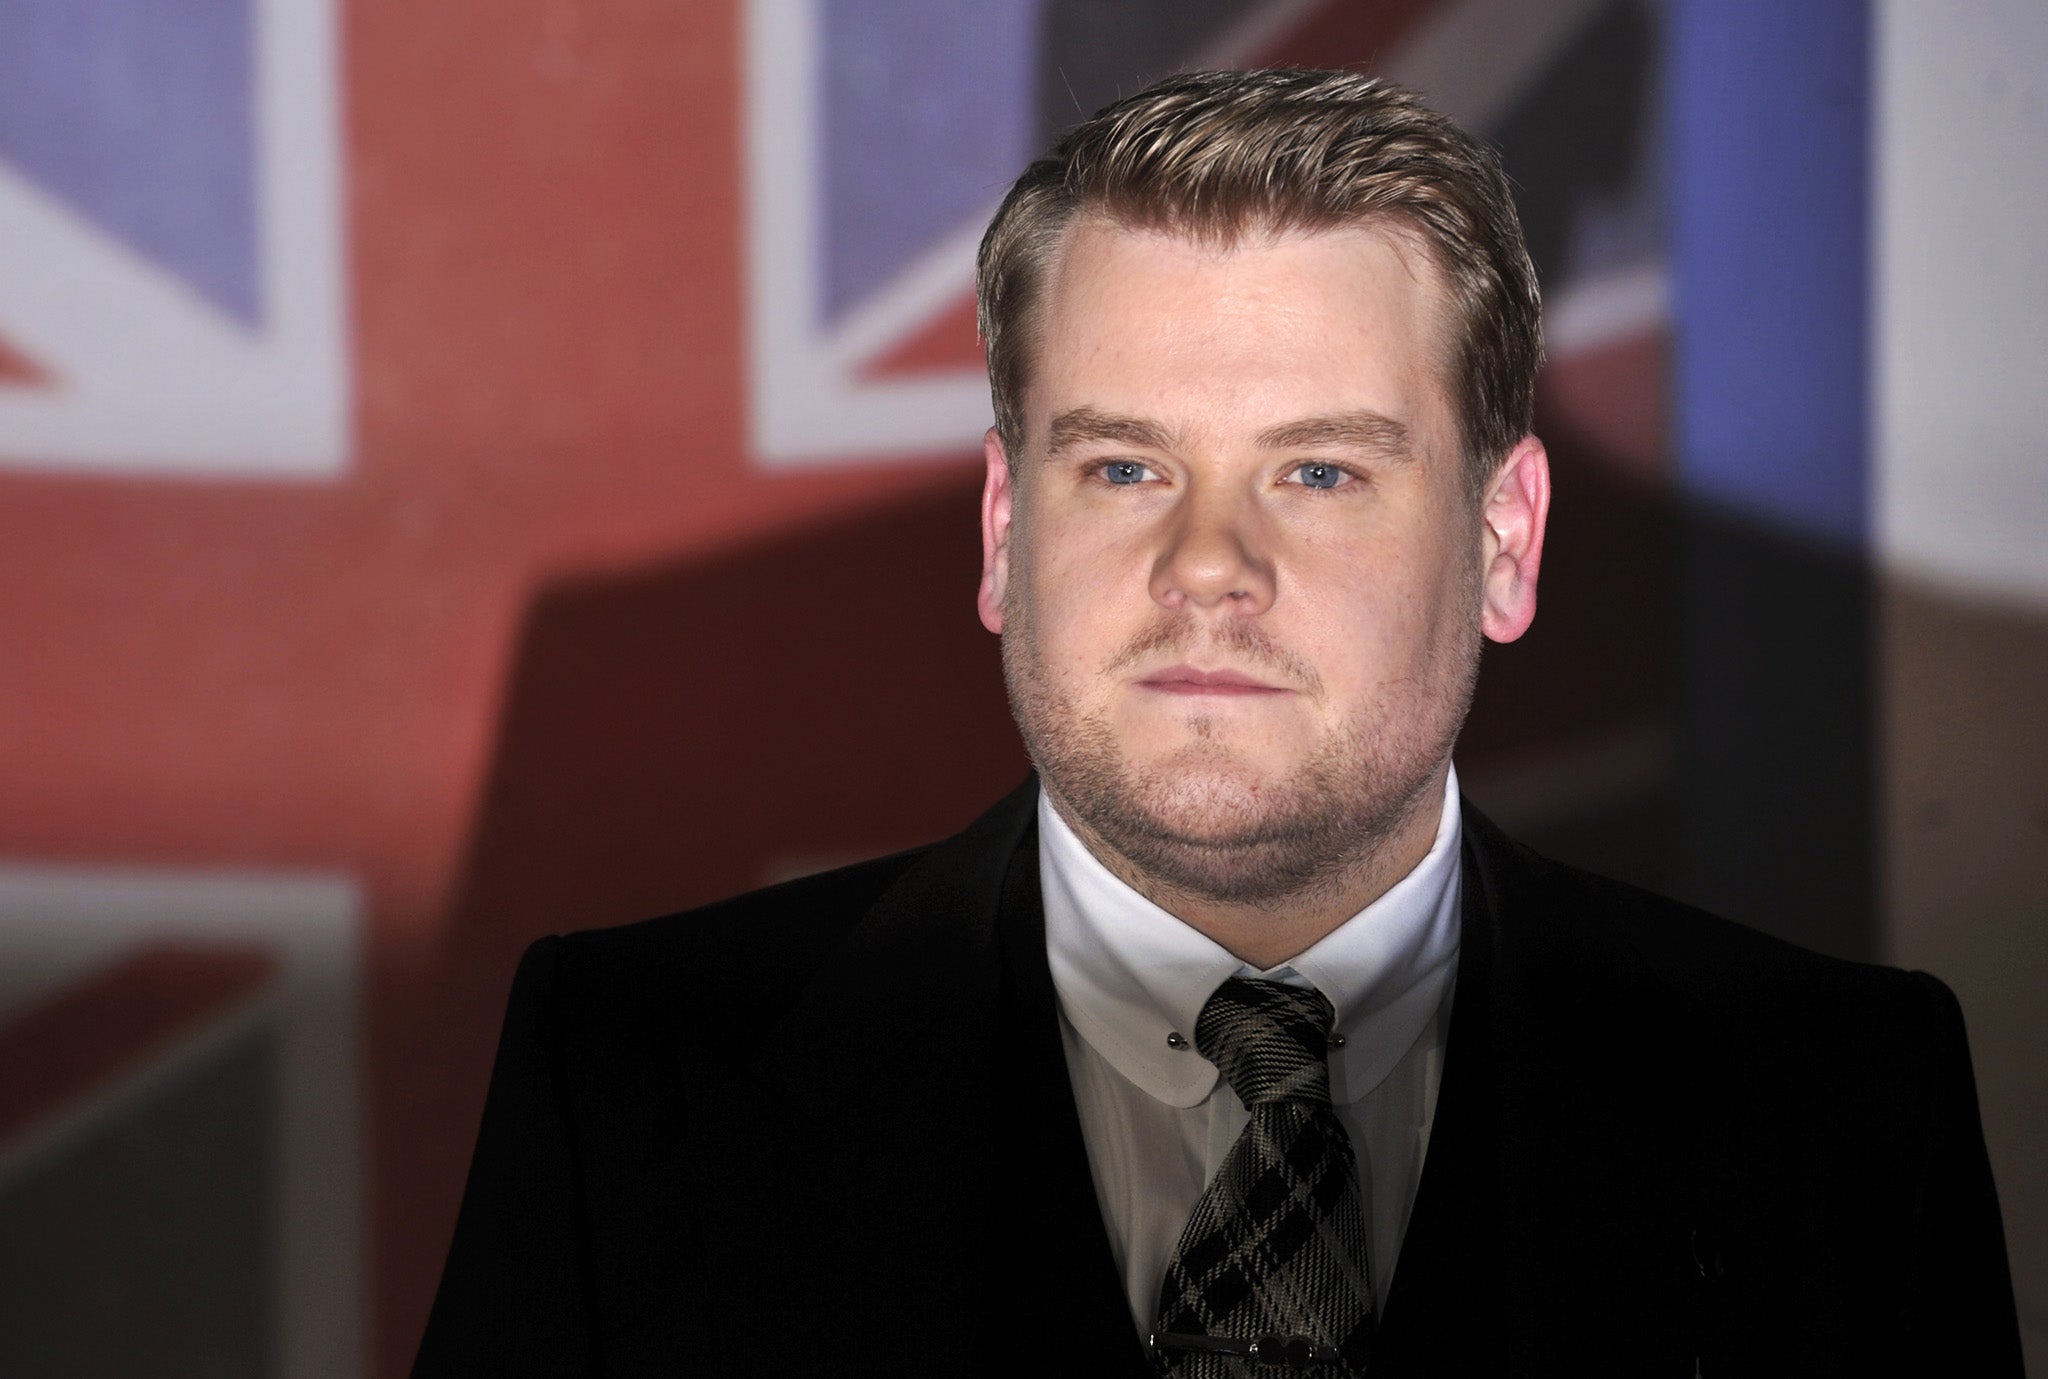 James Corden had been tipped to take over from Craig Ferguson in August